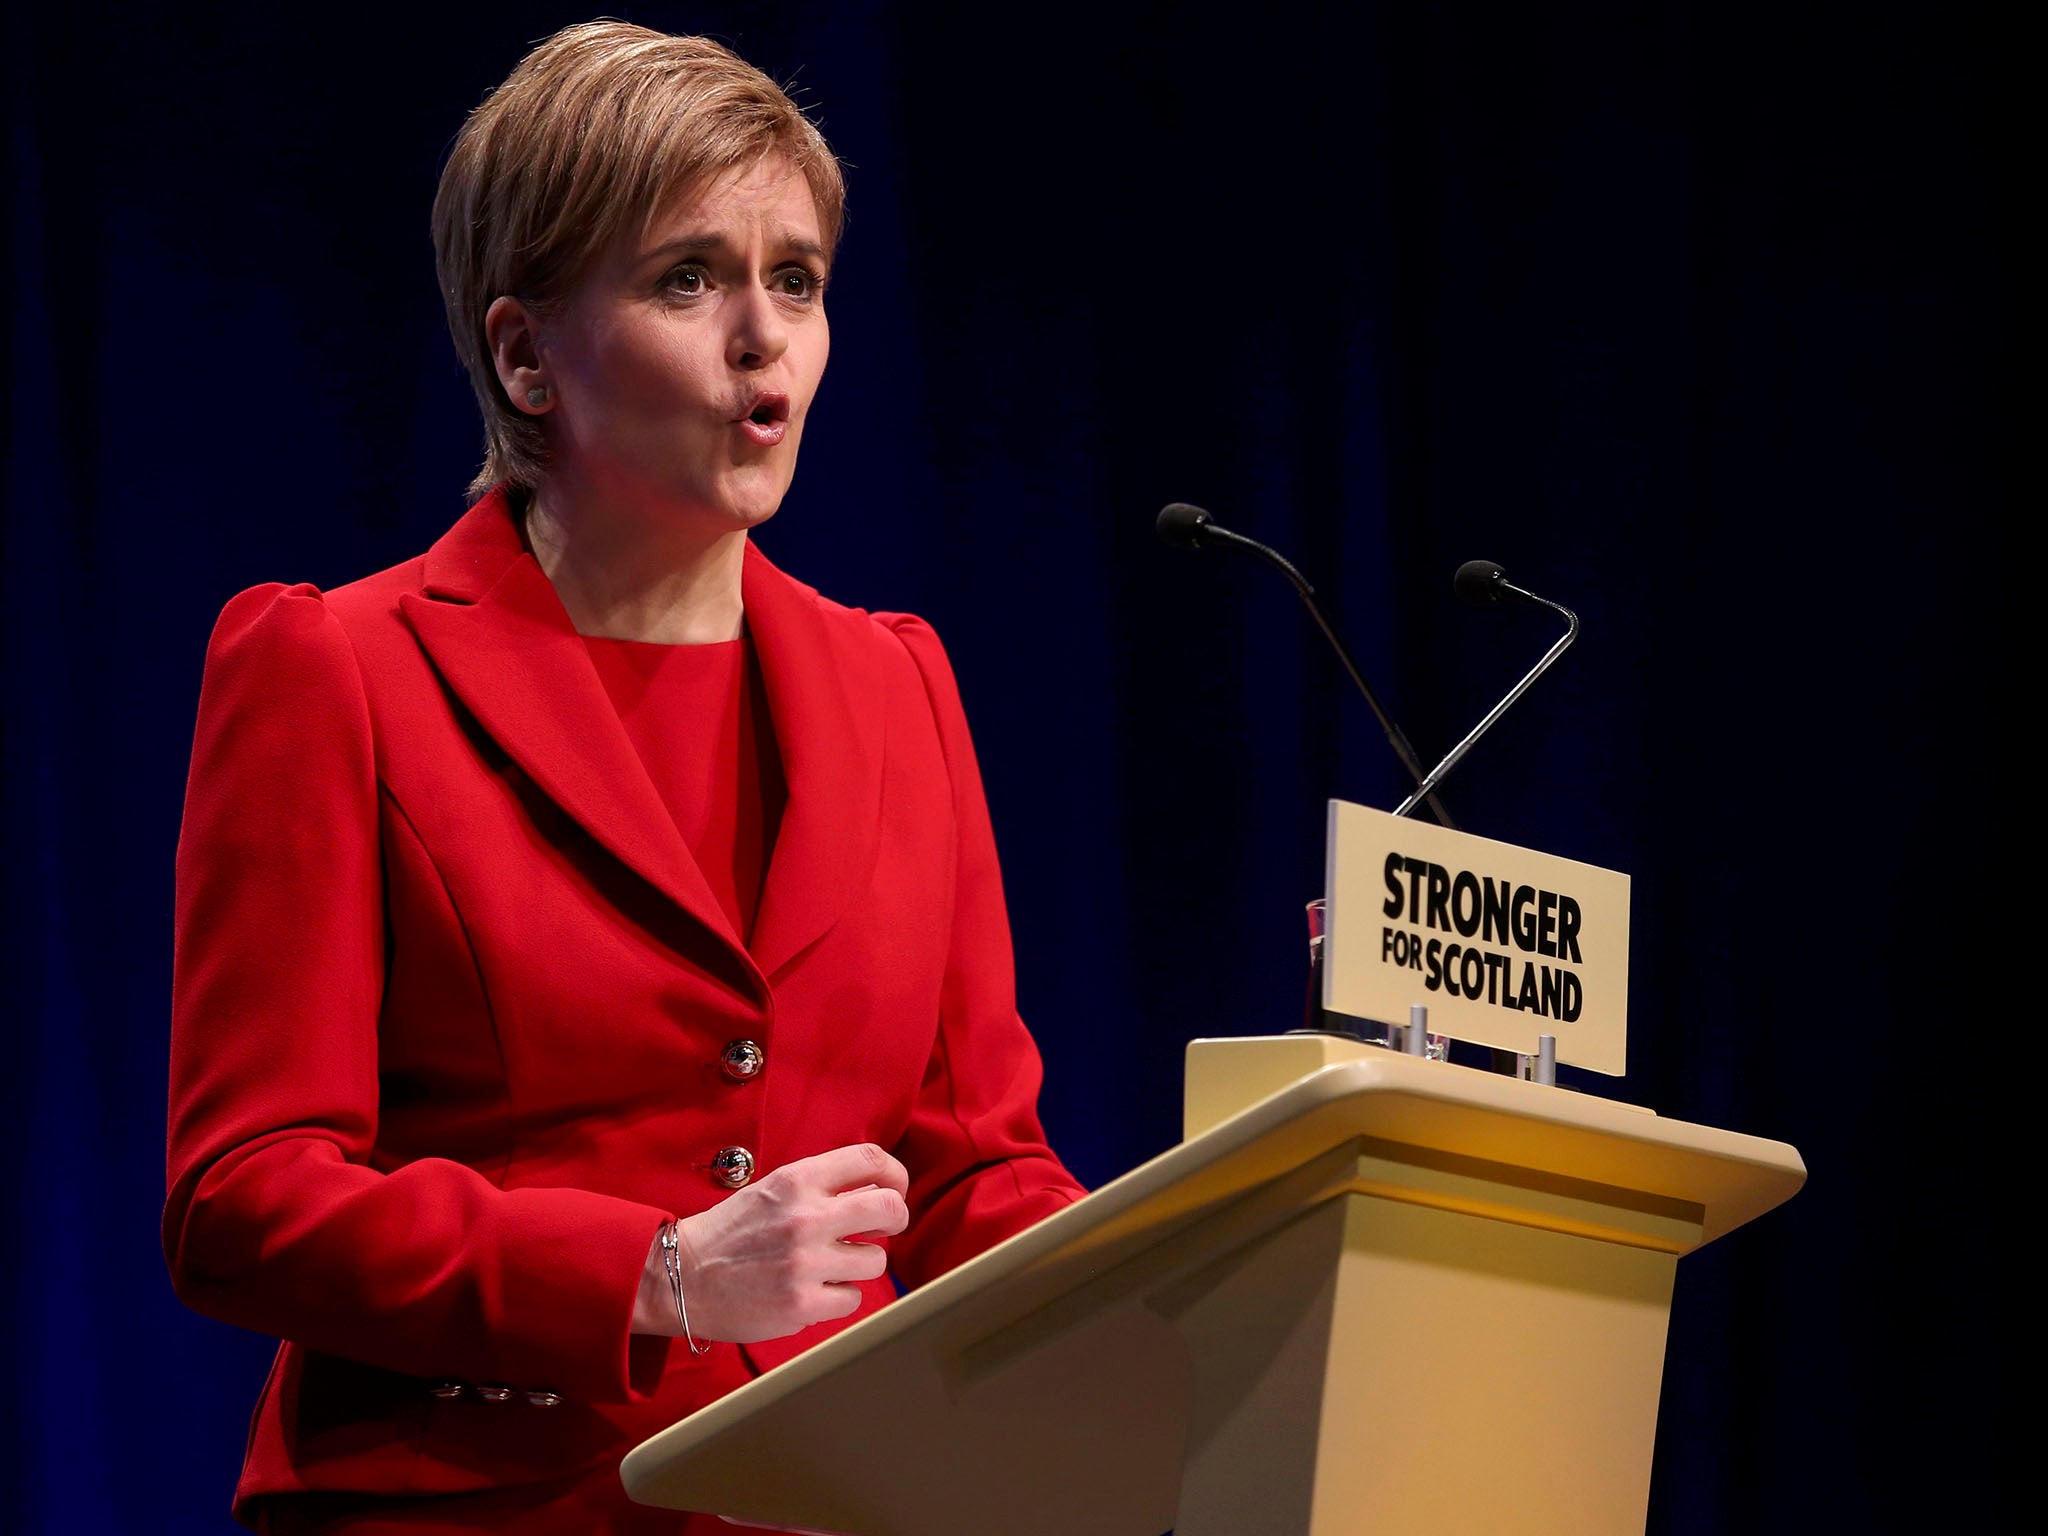 The SNP has been attacked by Labour before for supposed tax-cutting and free market-friendly policies